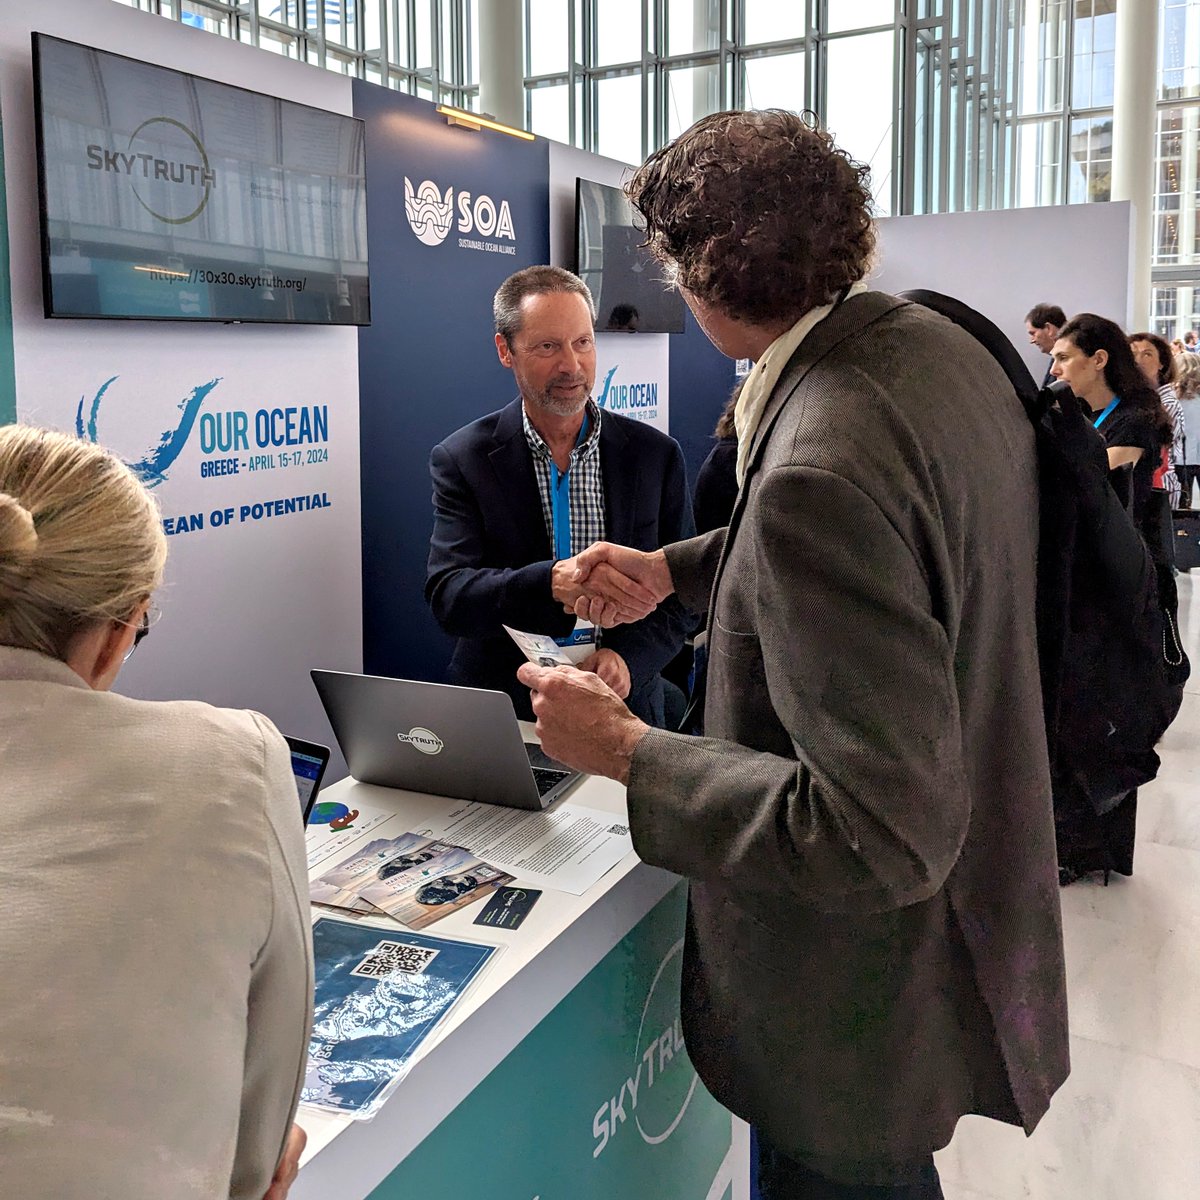 We've been celebrating the launch of the #30x30 Progress Tracker with @BloombergDotOrg at our shared booth at #OurOcean2024! Come visit us to learn more. We'll be manning the booth from 12-2pm on Wednesday and our partners will be at the booth when we are away - stop by any time!